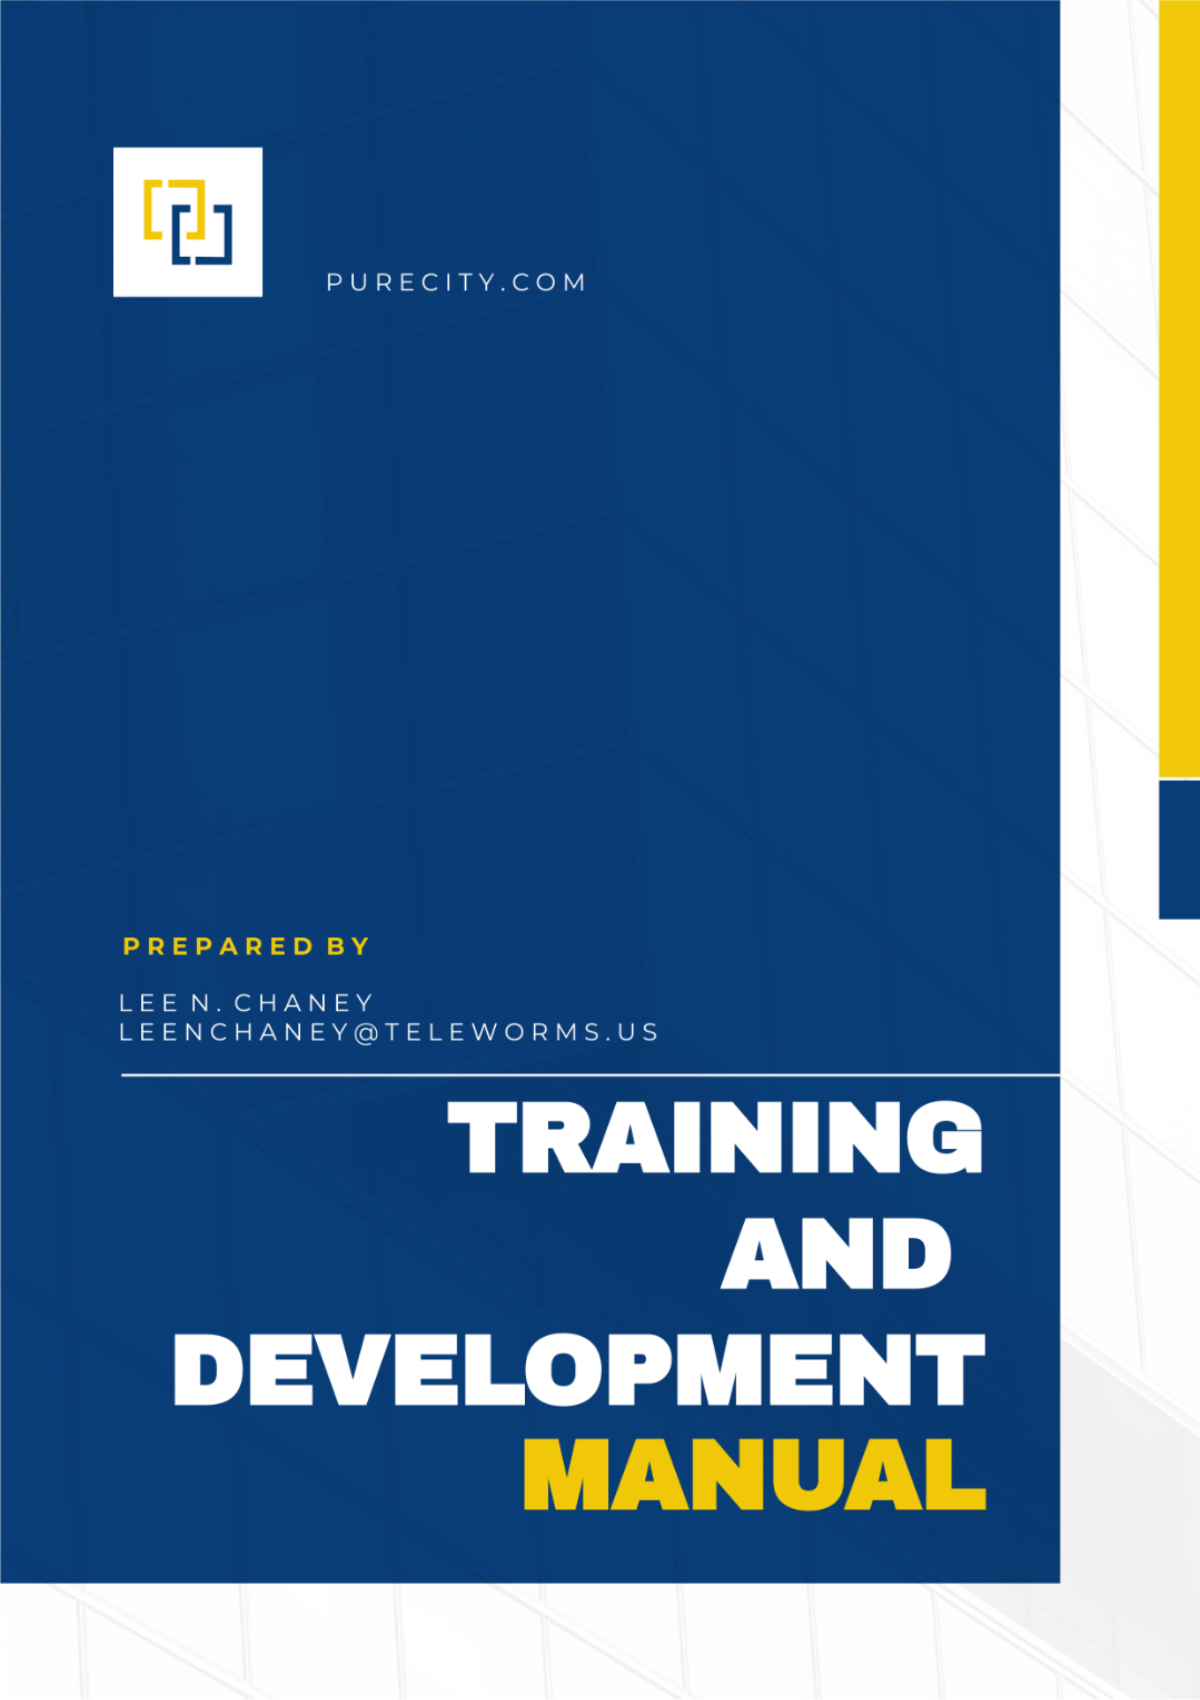 Training and Development Manual Template